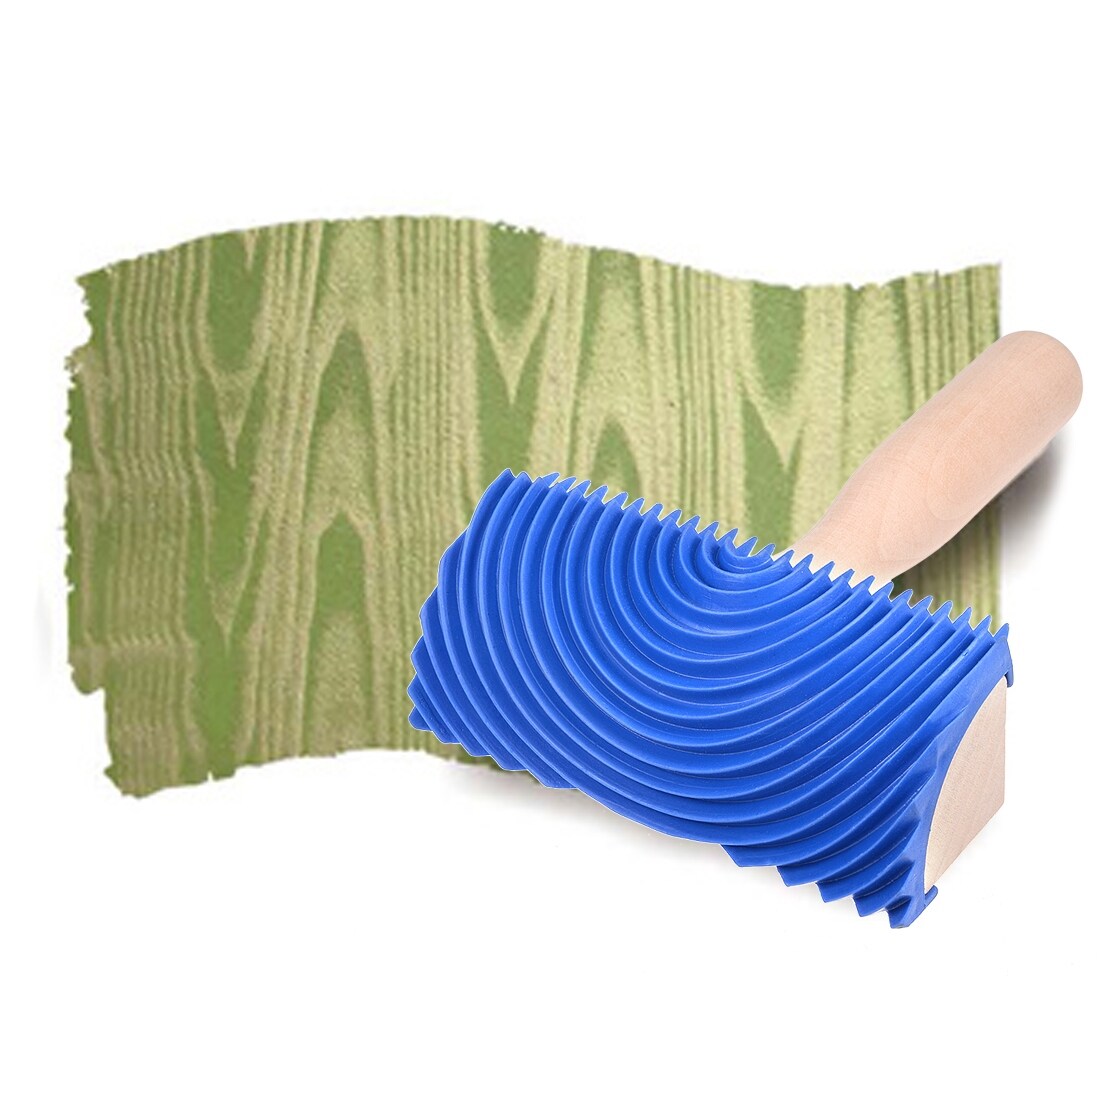 Wood Grain Tool 5 w Wooden Handle Rubber Graining Pattern Stamp Wall  Decoration - Blue - MS19A-5-inch Wooden Handle - Bed Bath & Beyond -  26851094